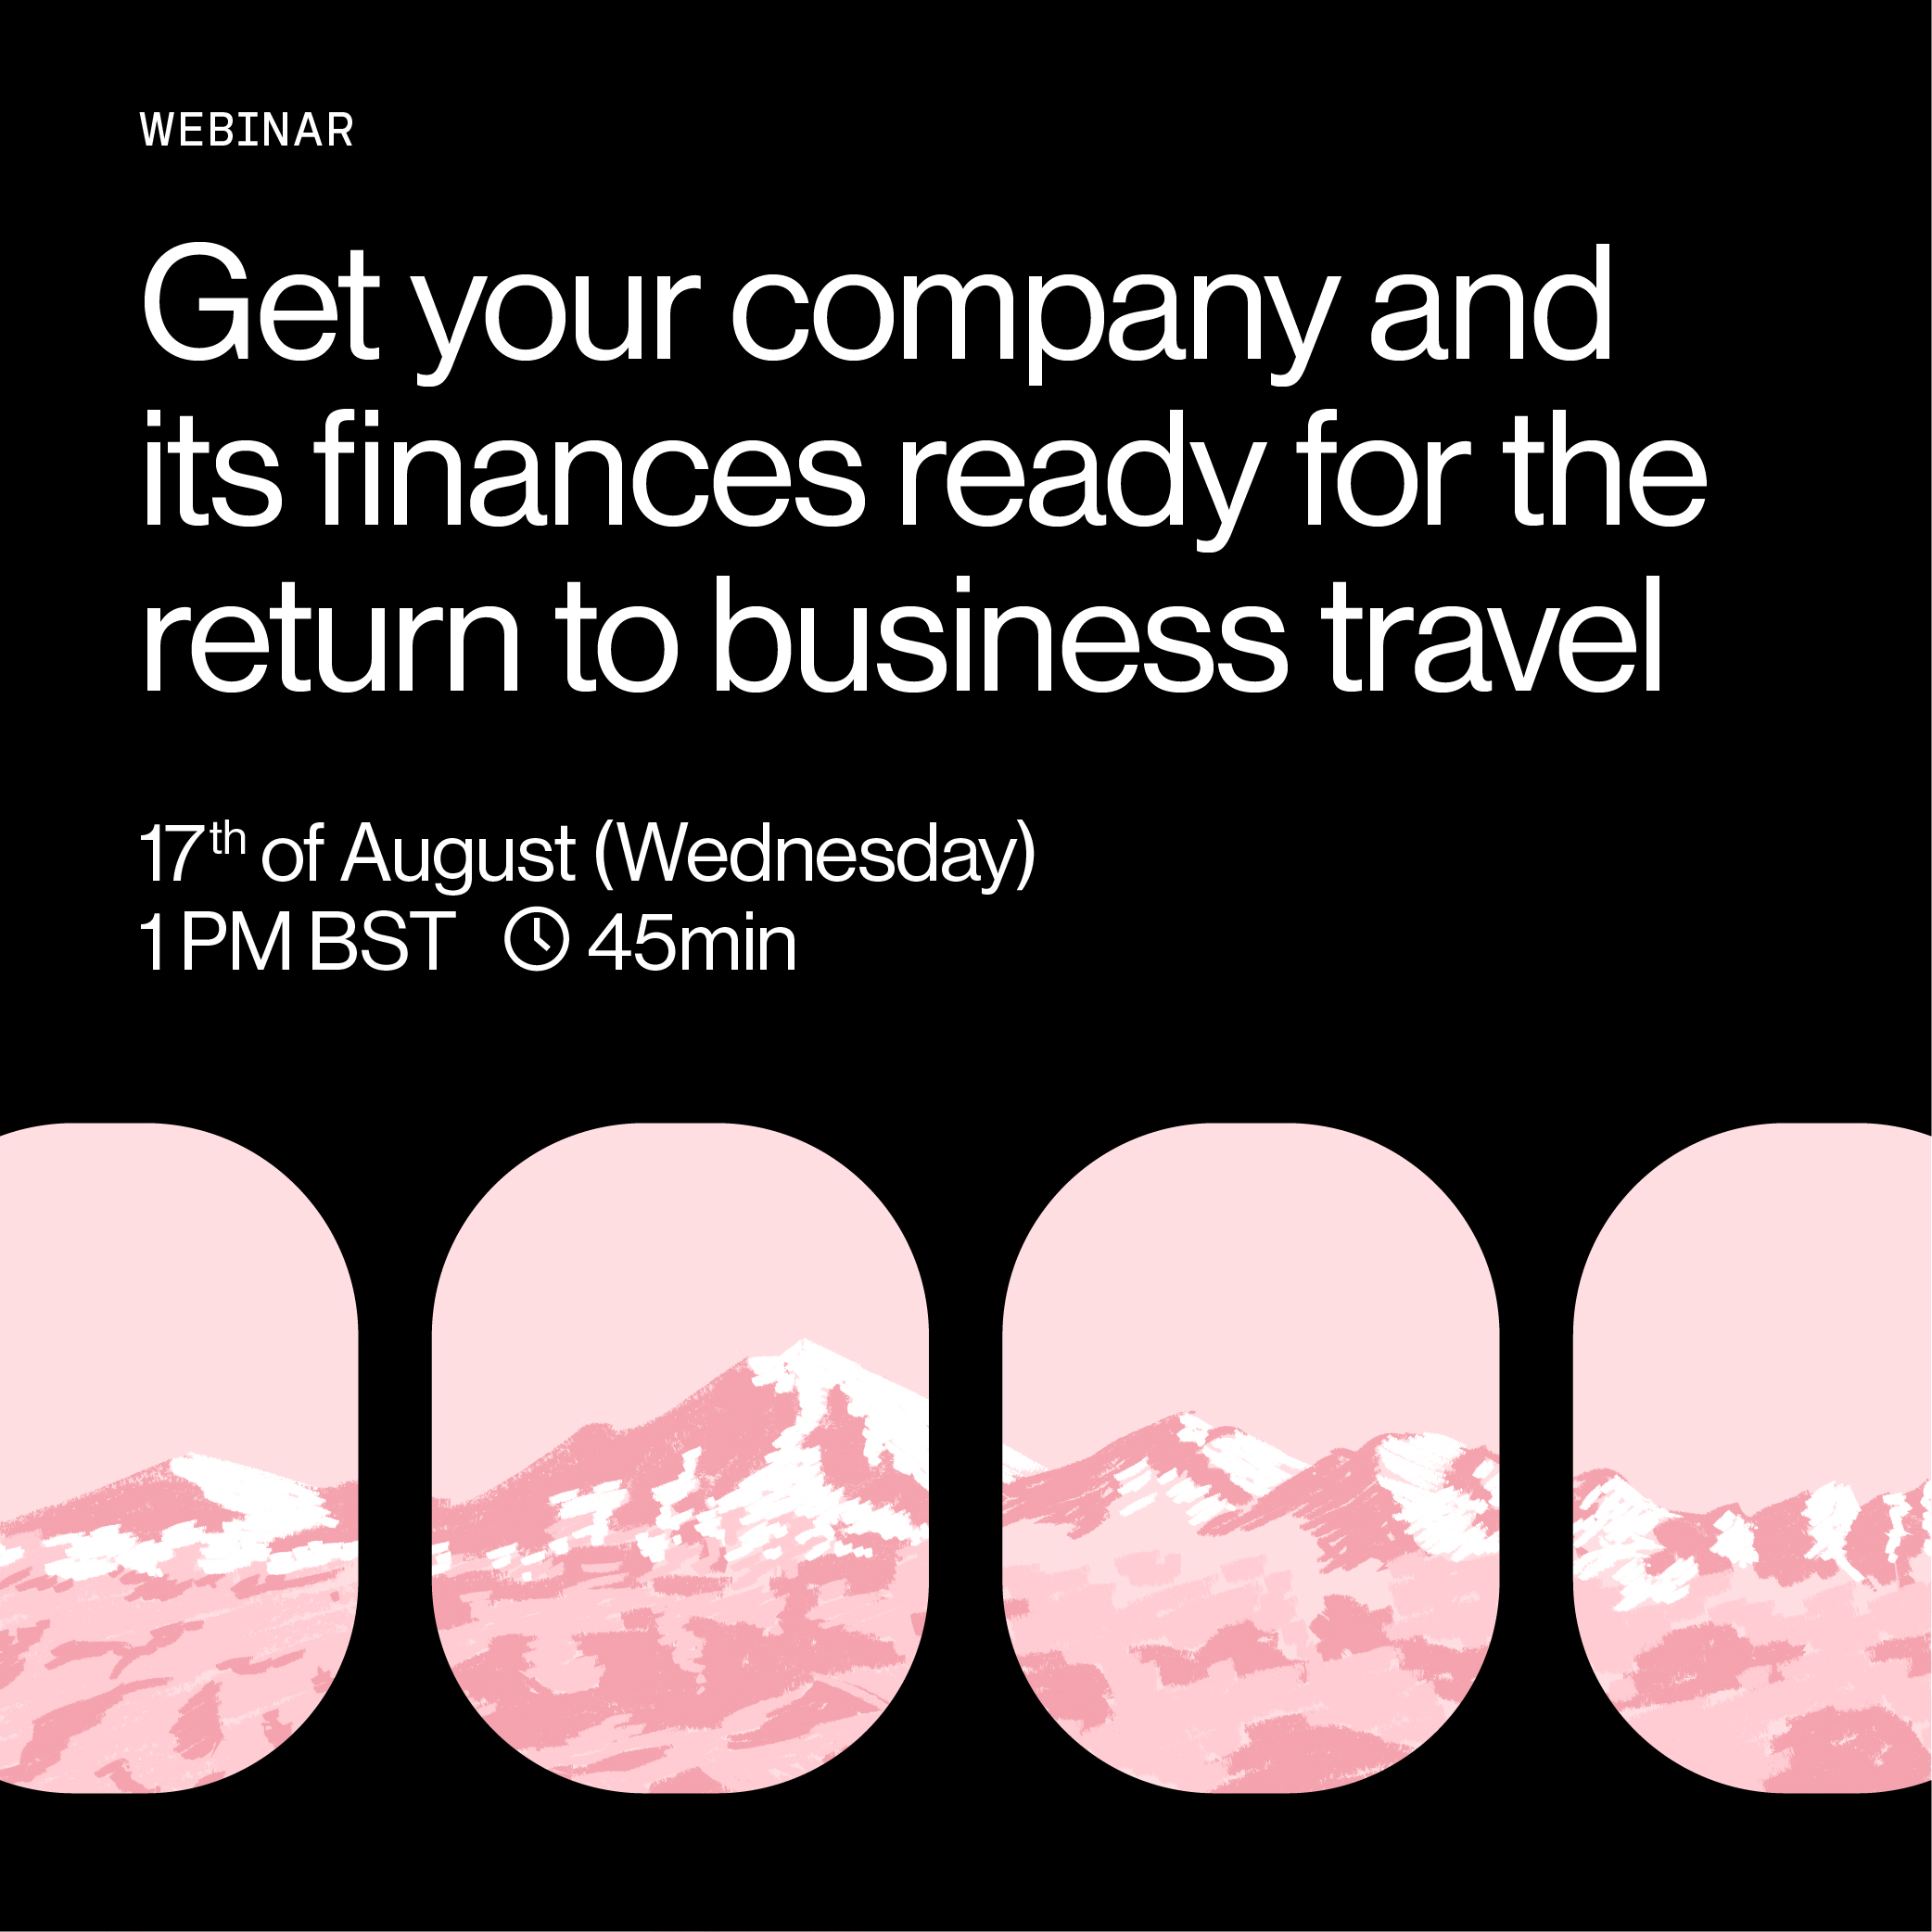 Webinar: Get your company and its finances ready for the return of business travel -17th of August, 1PM BST, 45min